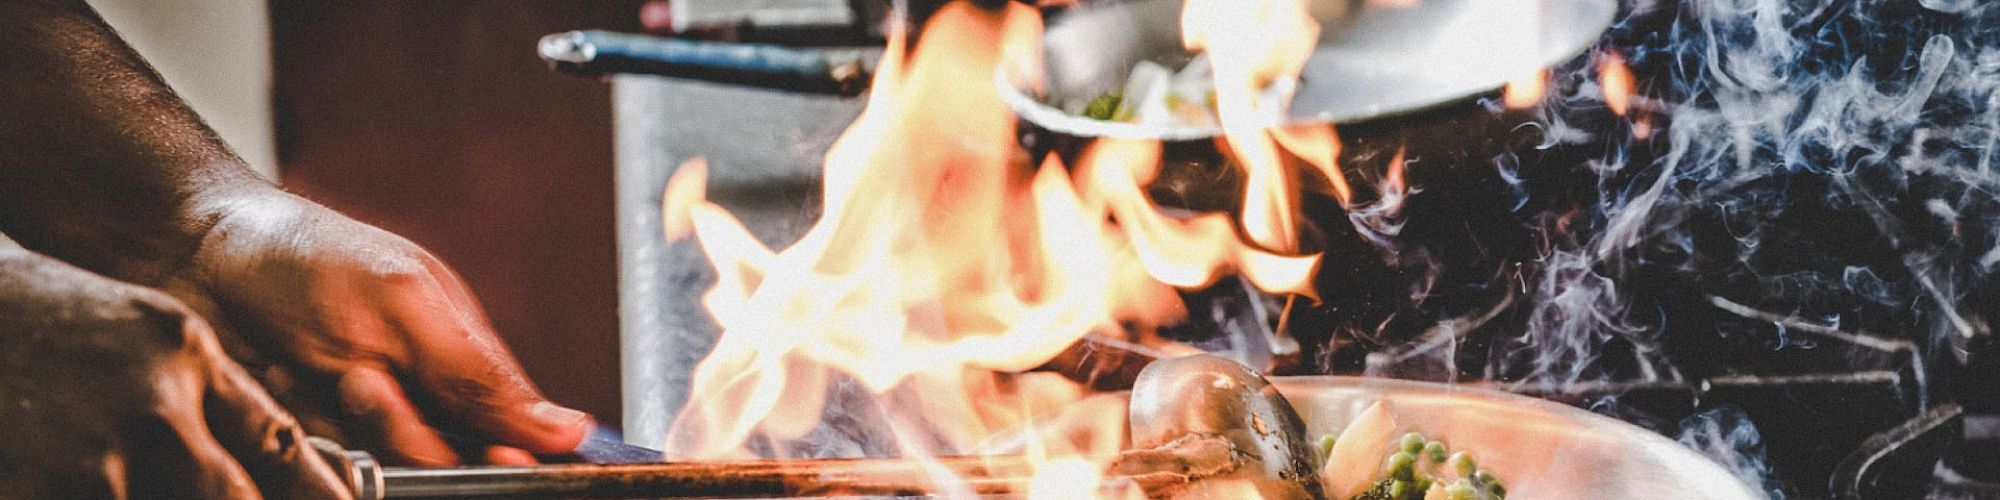 A chef is cooking with intense flames and smoke in a busy kitchen, using a metal spoon to stir ingredients in a skillet.